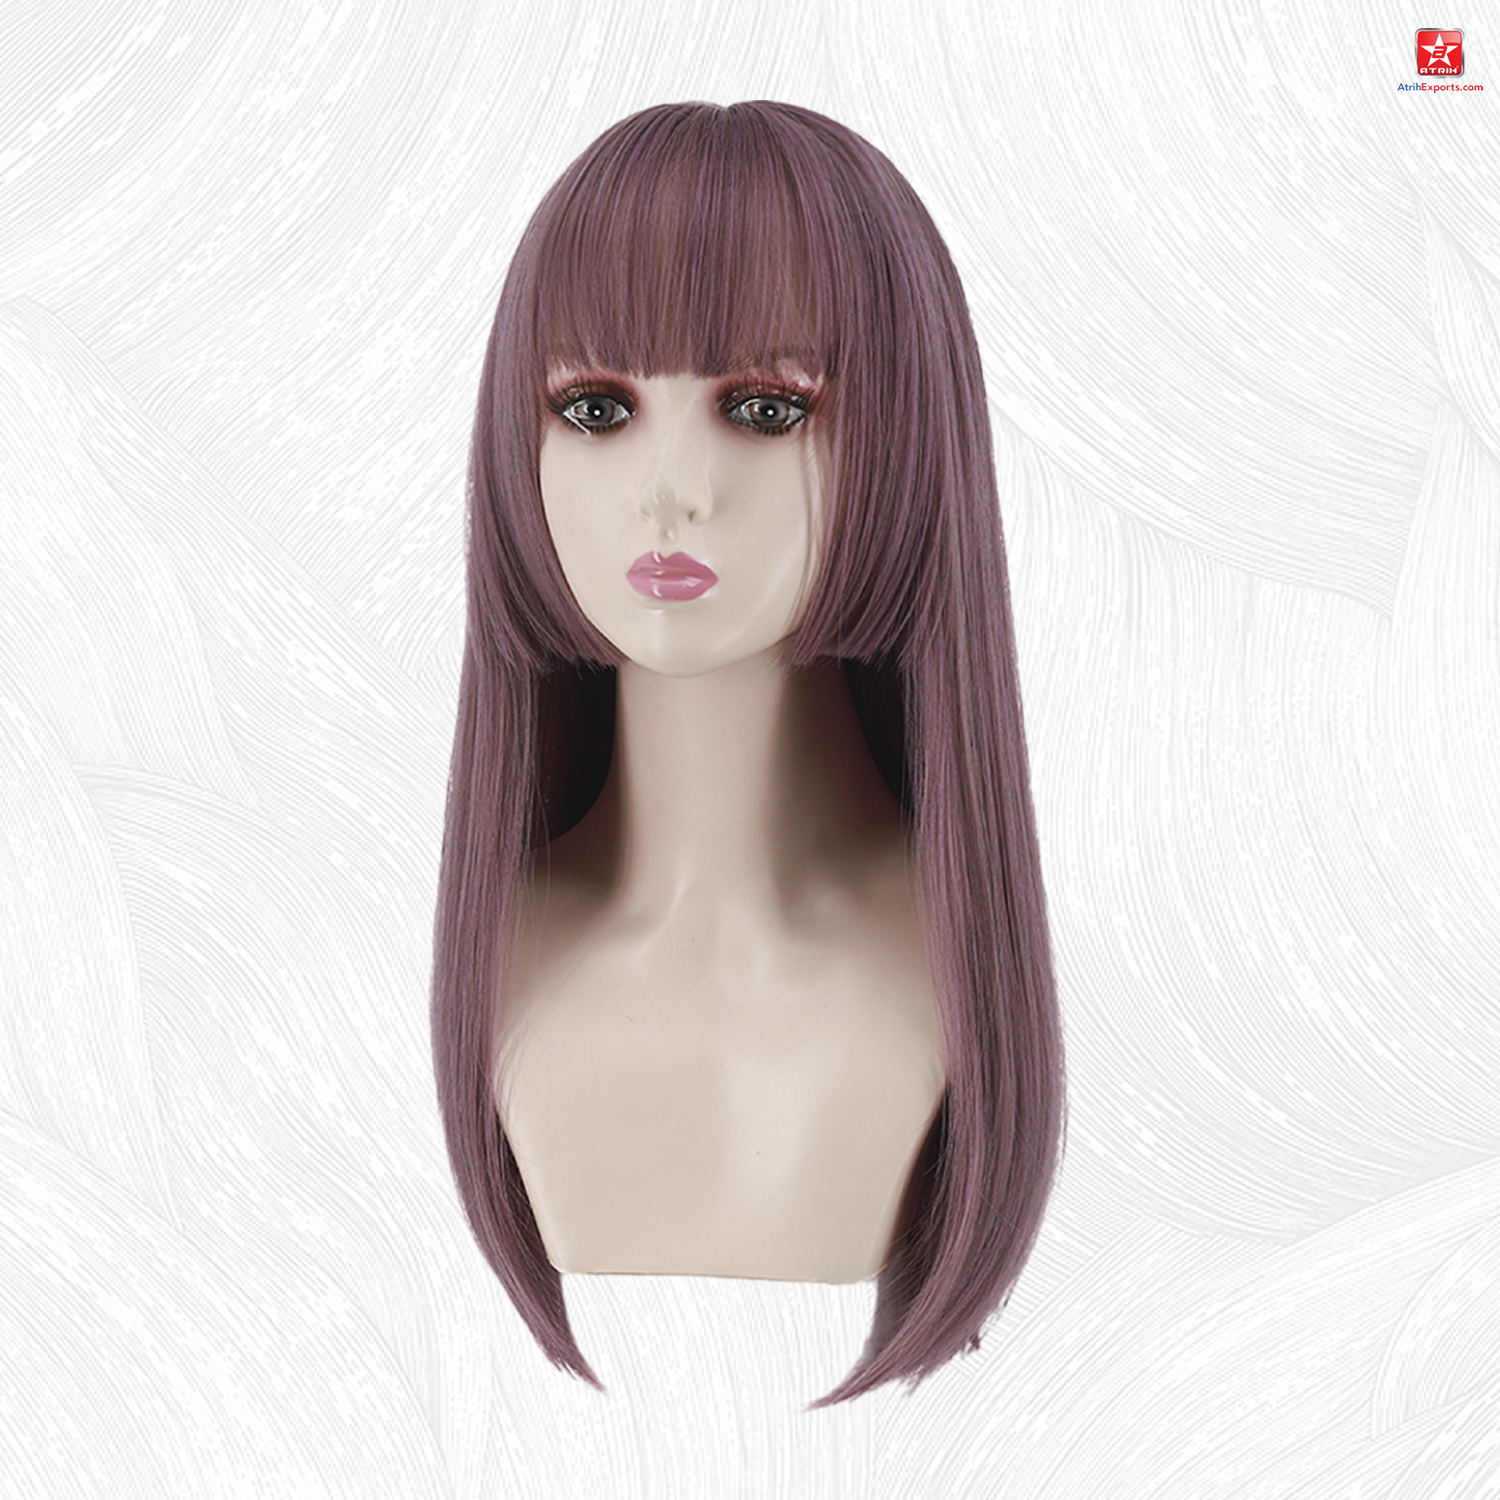 Long Straight Wigs Synthetic Wigs Plum Coloured Wavy Curly Hair Cosplay Hair Wigs for Black Women